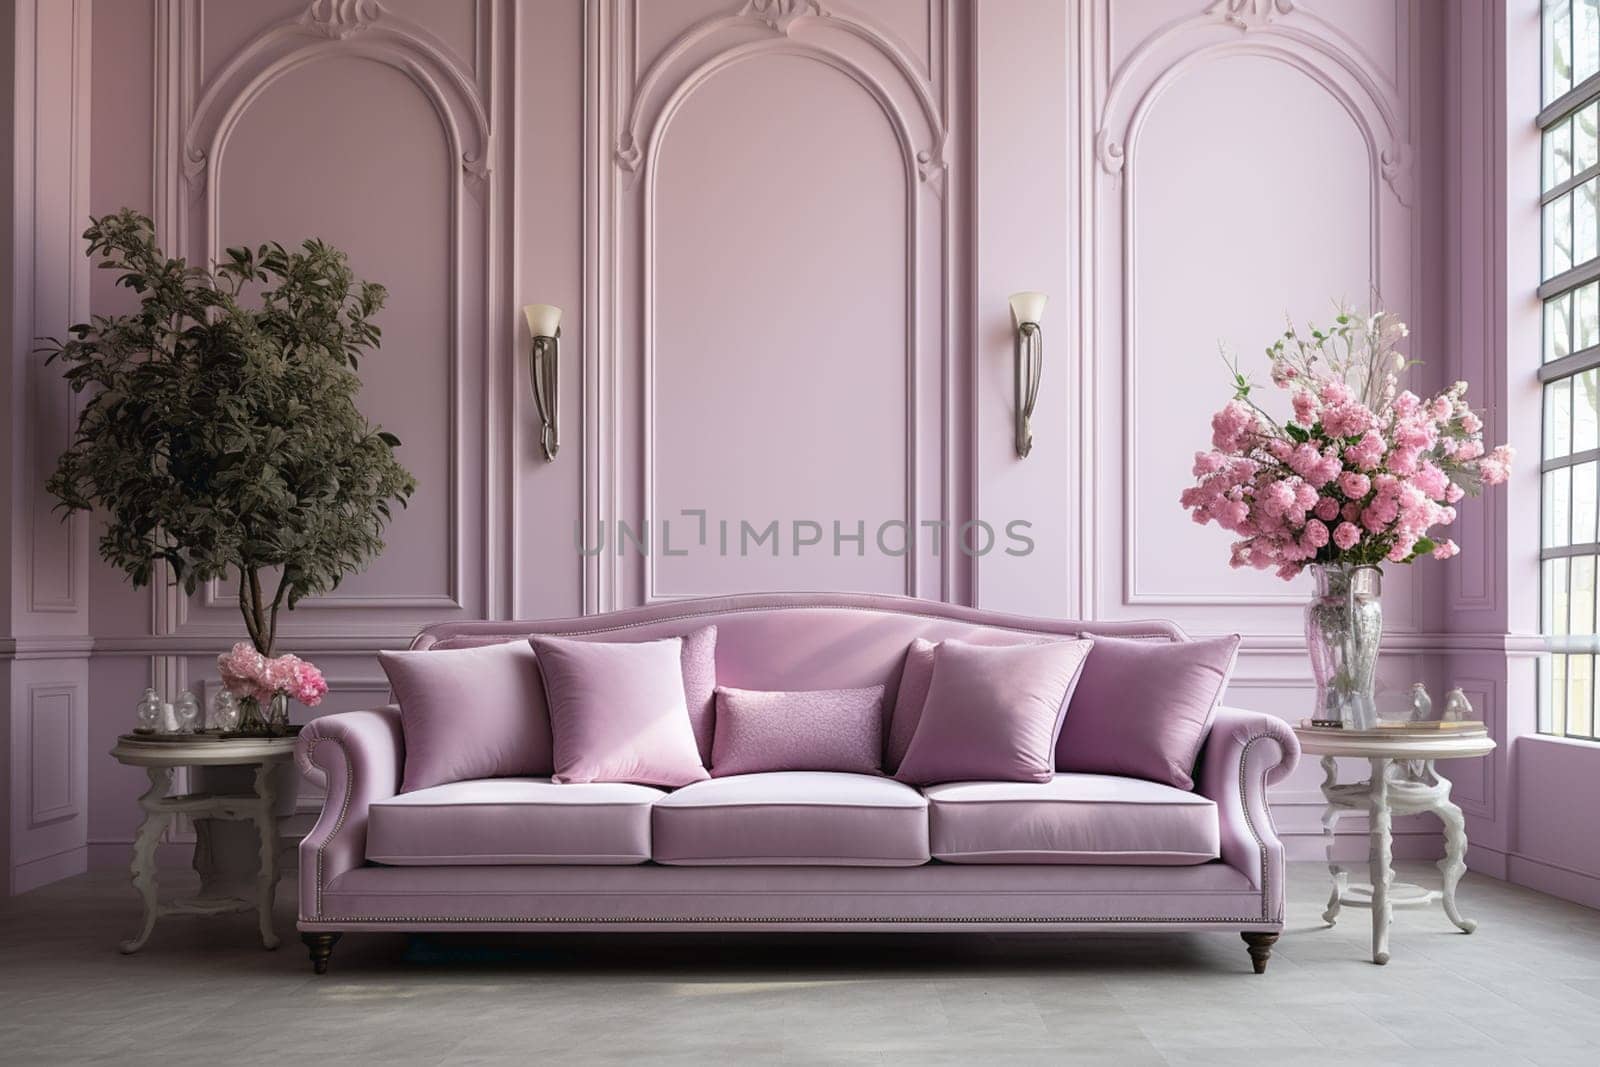 White room with pink sofa-bed, flowers in glass jug and mirror near the window. Classic interior design. High quality photo